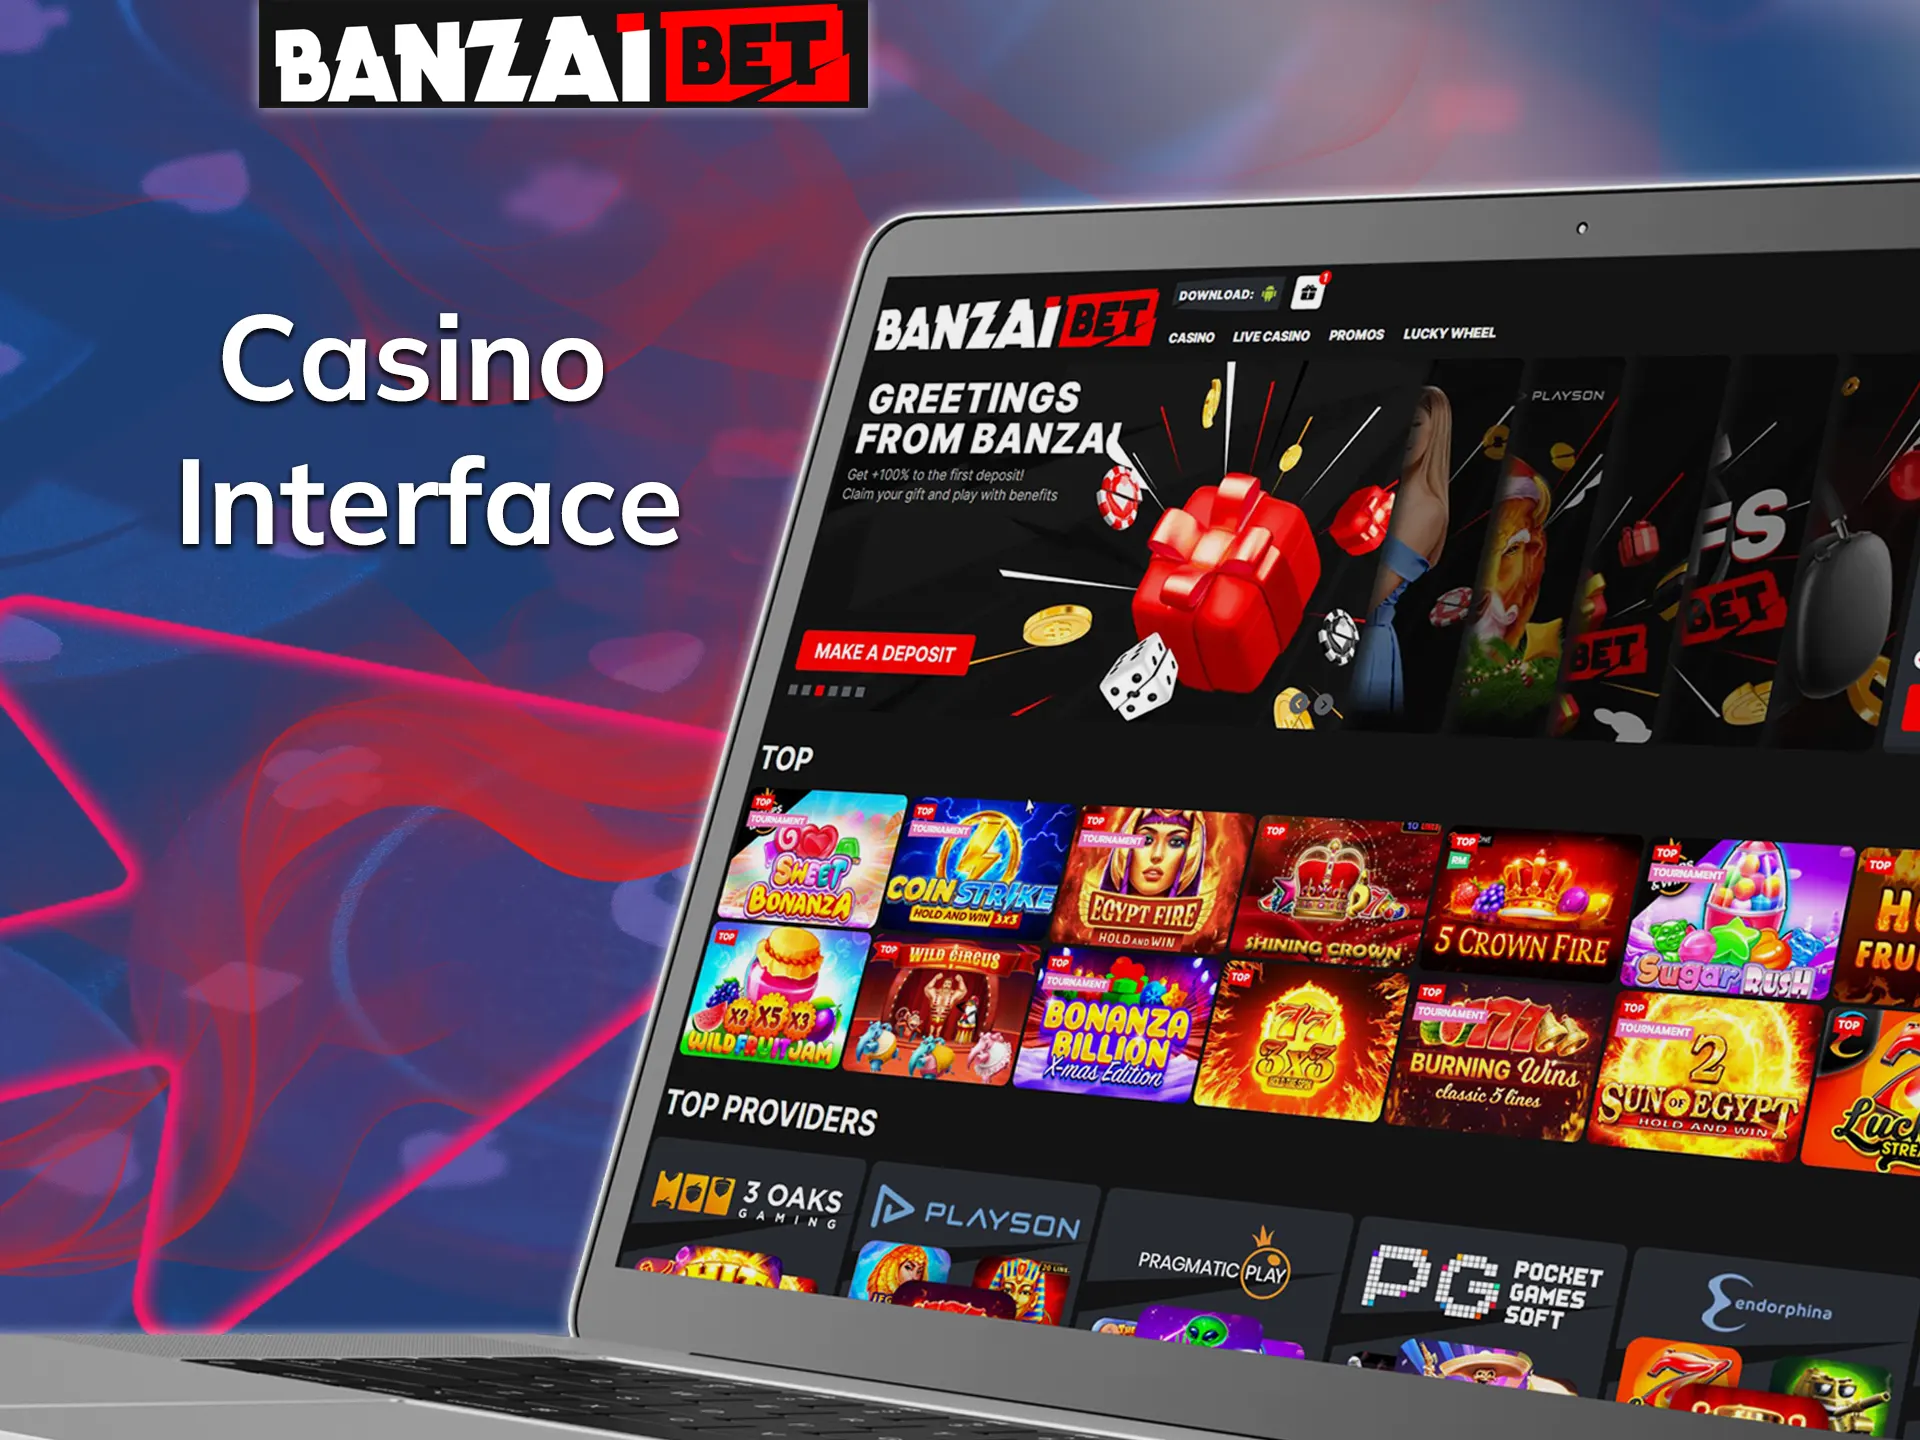 Interface The Banzai Bet website has a colourful and user-friendly interface.